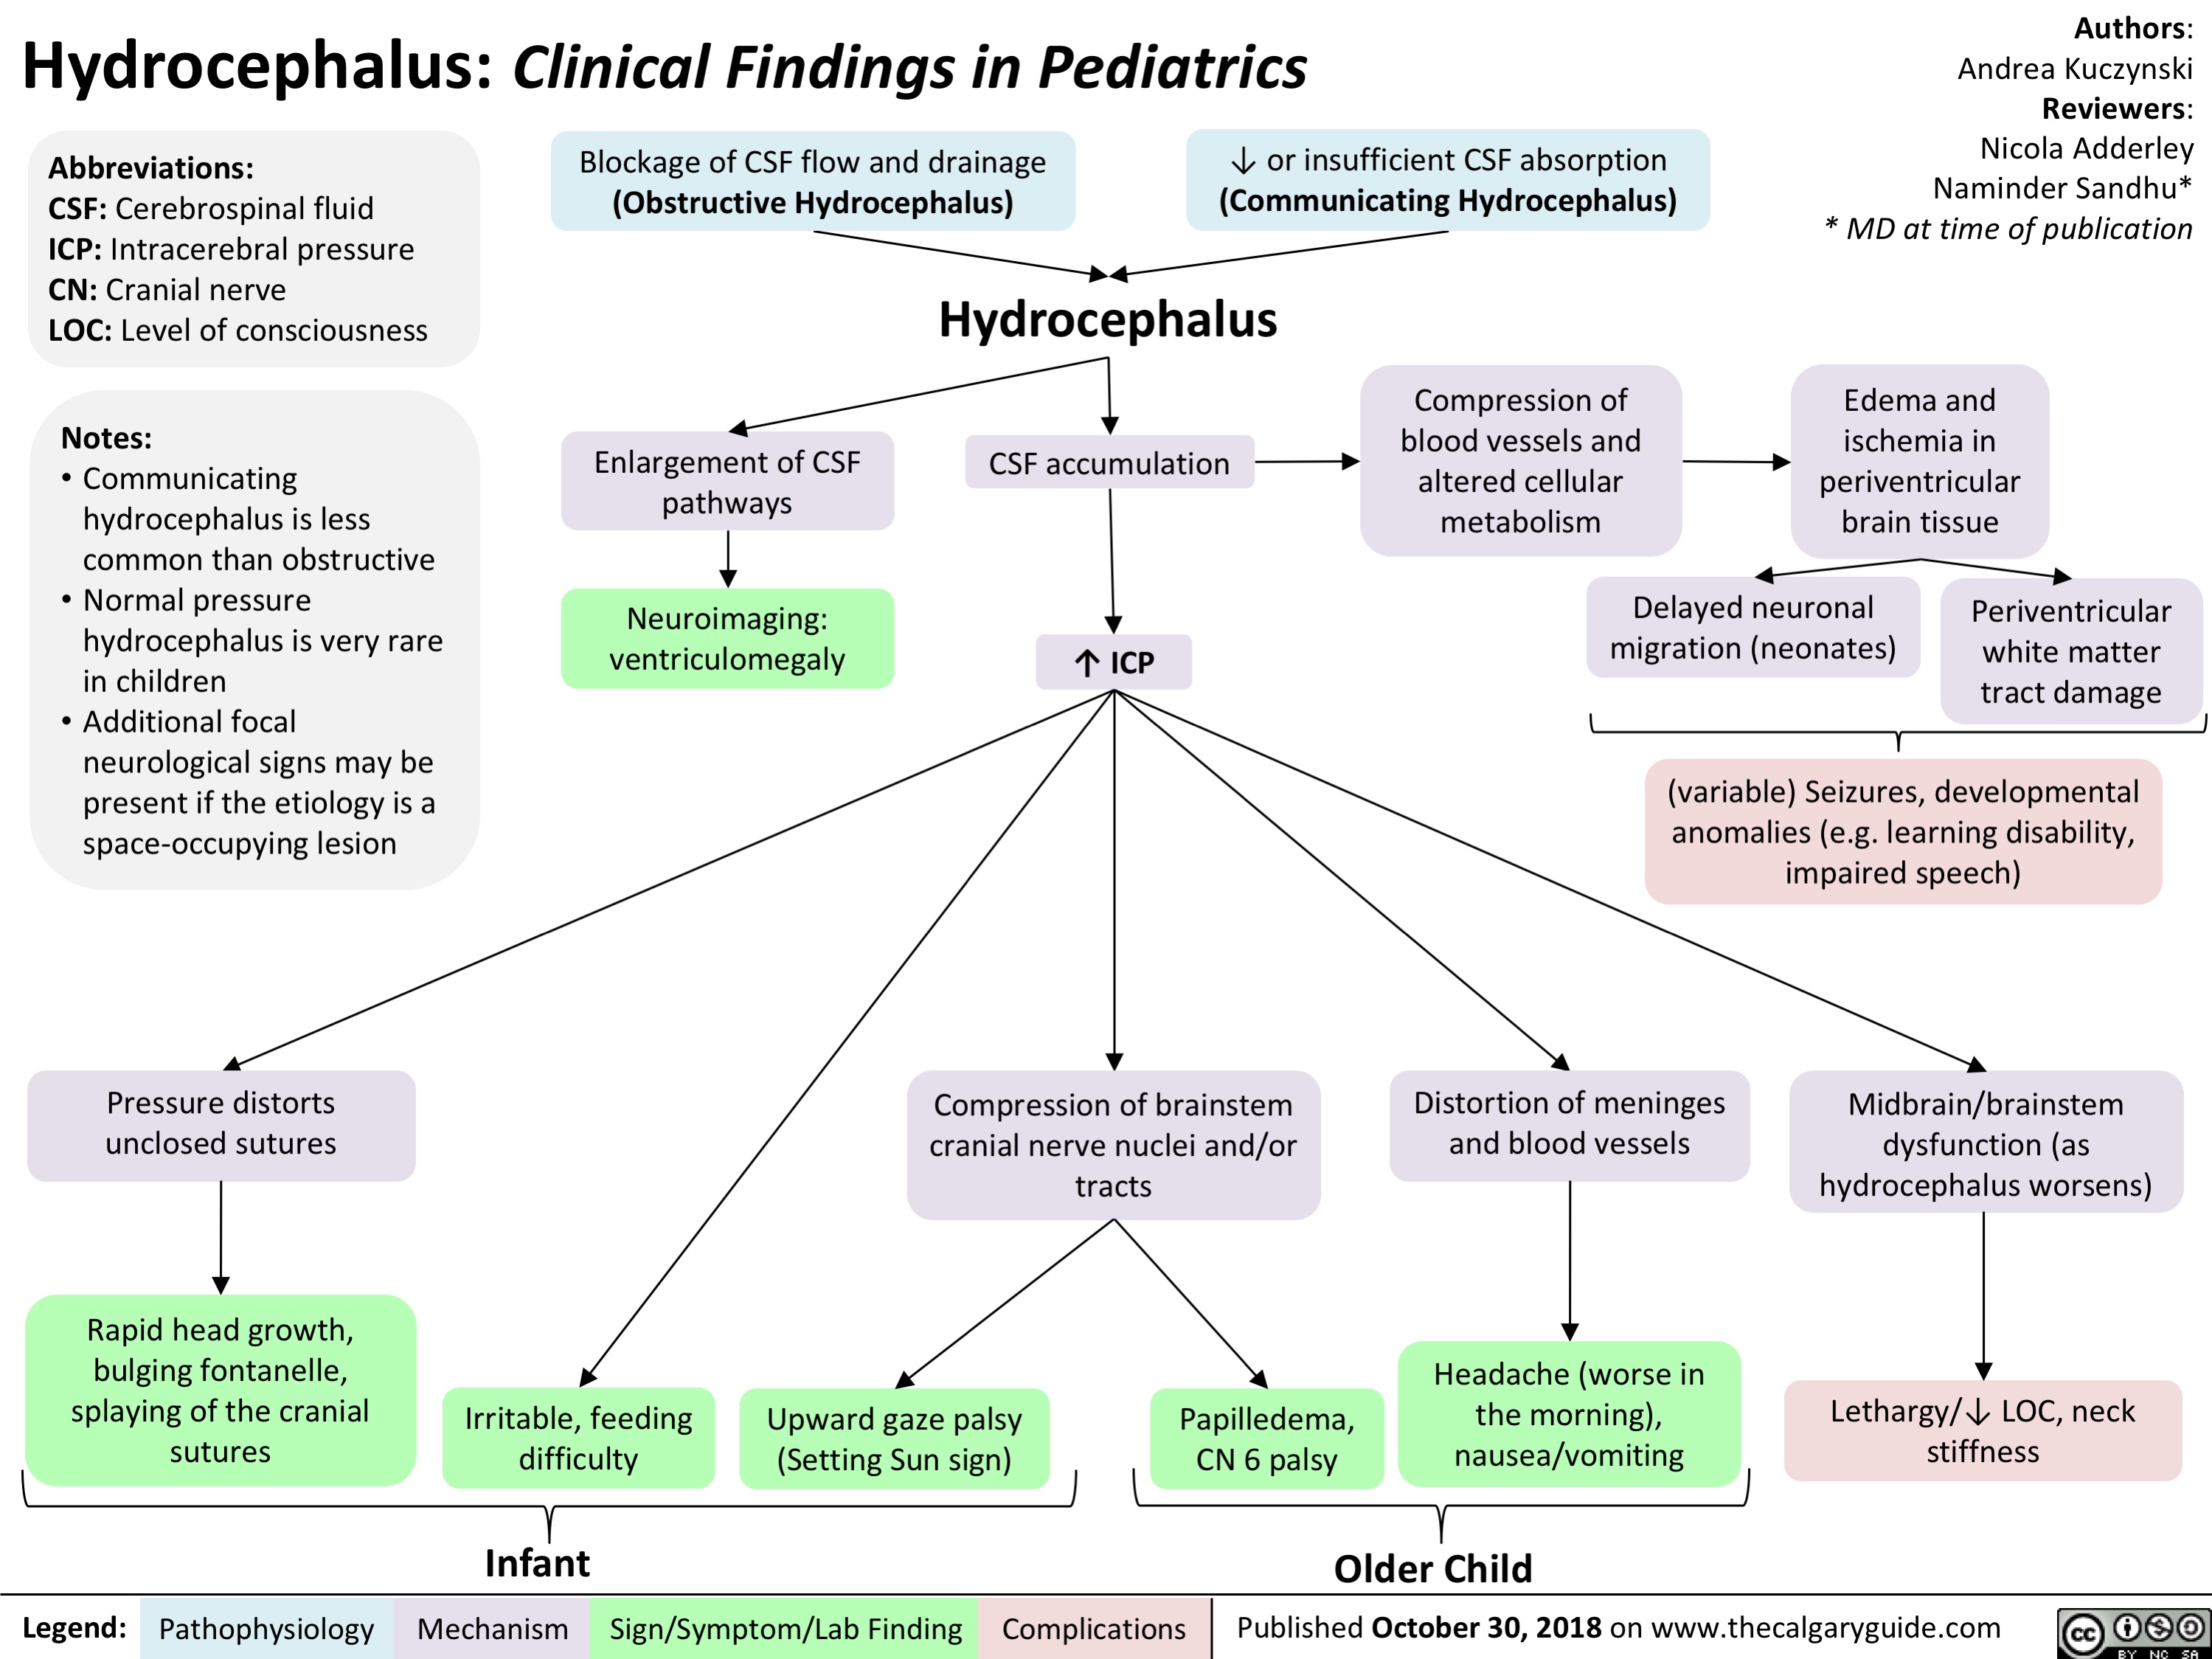 Hydrocephalus: Clinical Findings in Pediatrics
Authors: Andrea Kuczynski Reviewers: Nicola Adderley Naminder Sandhu* * MD at time of publication
Edema and
ischemia in periventricular brain tissue
   Abbreviations:
CSF: Cerebrospinal fluid ICP: Intracerebral pressure CN: Cranial nerve
LOC: Level of consciousness
Notes:
• Communicating hydrocephalus is less common than obstructive
• Normal pressure hydrocephalus is very rare in children
• Additional focal neurological signs may be present if the etiology is a space-occupying lesion
Pressure distorts unclosed sutures
Rapid head growth, bulging fontanelle, splaying of the cranial sutures
Blockage of CSF flow and drainage
(Obstructive Hydrocephalus)
↓ or insufficient CSF absorption
(Communicating Hydrocephalus) Hydrocephalus
       Enlargement of CSF pathways
Neuroimaging: ventriculomegaly
CSF accumulation
↑ ICP
Compression of blood vessels and altered cellular metabolism
       Delayed neuronal migration (neonates)
Periventricular white matter tract damage
         (variable) Seizures, developmental anomalies (e.g. learning disability, impaired speech)
    Compression of brainstem cranial nerve nuclei and/or tracts
Distortion of meninges and blood vessels
Headache (worse in the morning), nausea/vomiting
Midbrain/brainstem dysfunction (as hydrocephalus worsens)
Lethargy/↓ LOC, neck stiffness
          Irritable, feeding difficulty
Upward gaze palsy (Setting Sun sign)
Papilledema, CN 6 palsy
  Infant
Older Child
 Legend:
 Pathophysiology
 Mechanism
Sign/Symptom/Lab Finding
  Complications
Published October 30, 2018 on www.thecalgaryguide.com
   